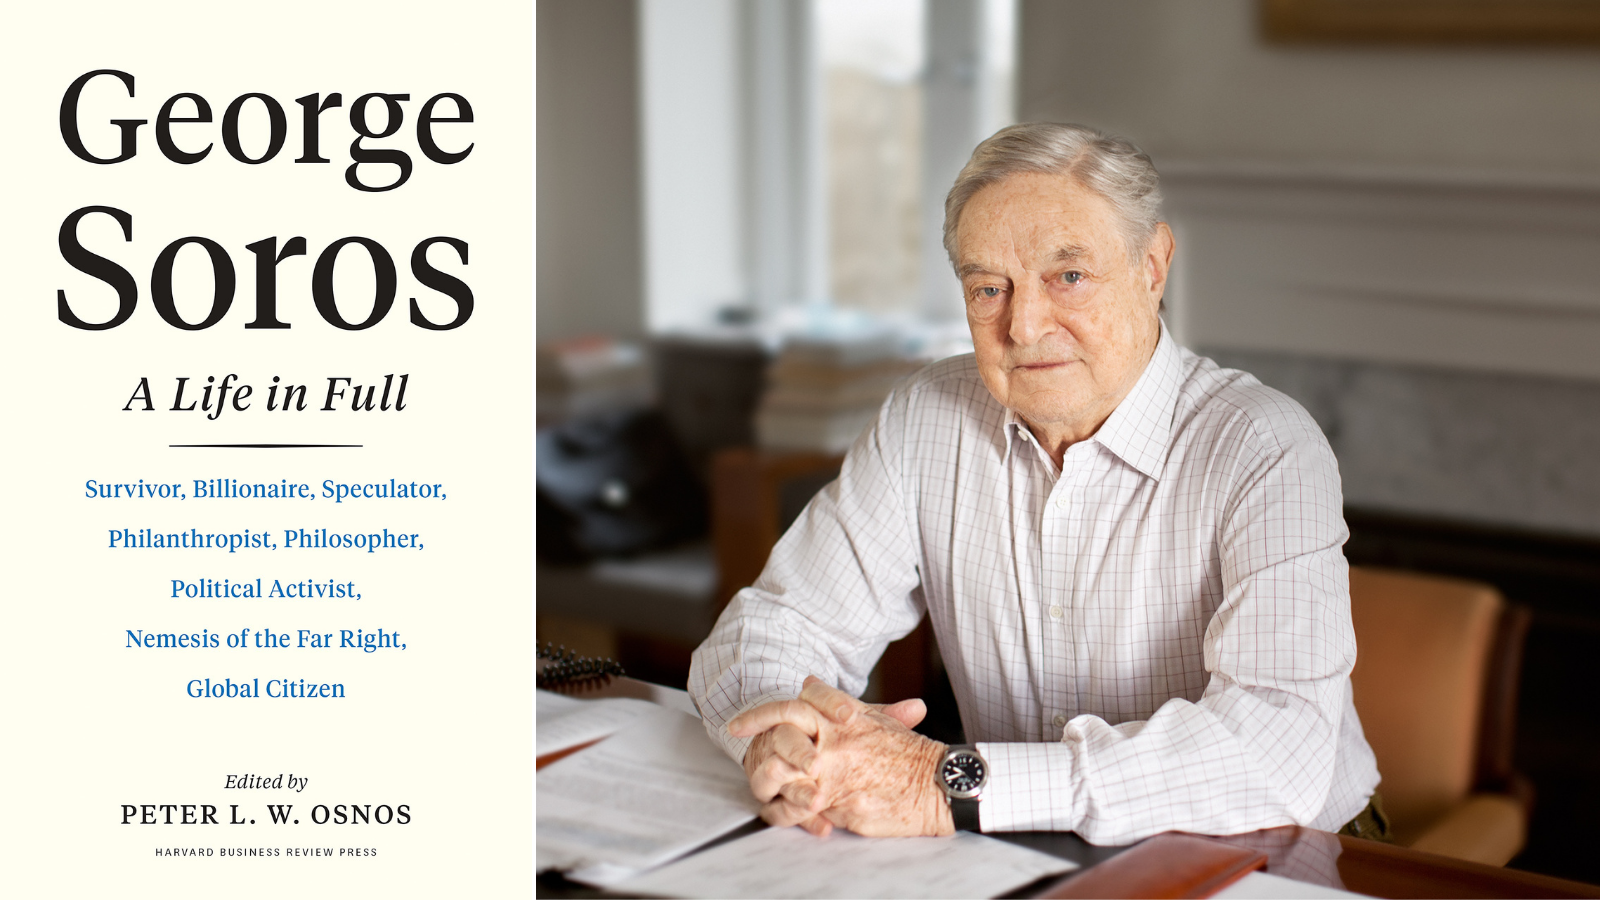 George Soros A Life in Full   Peter L W Osnos in Conversation